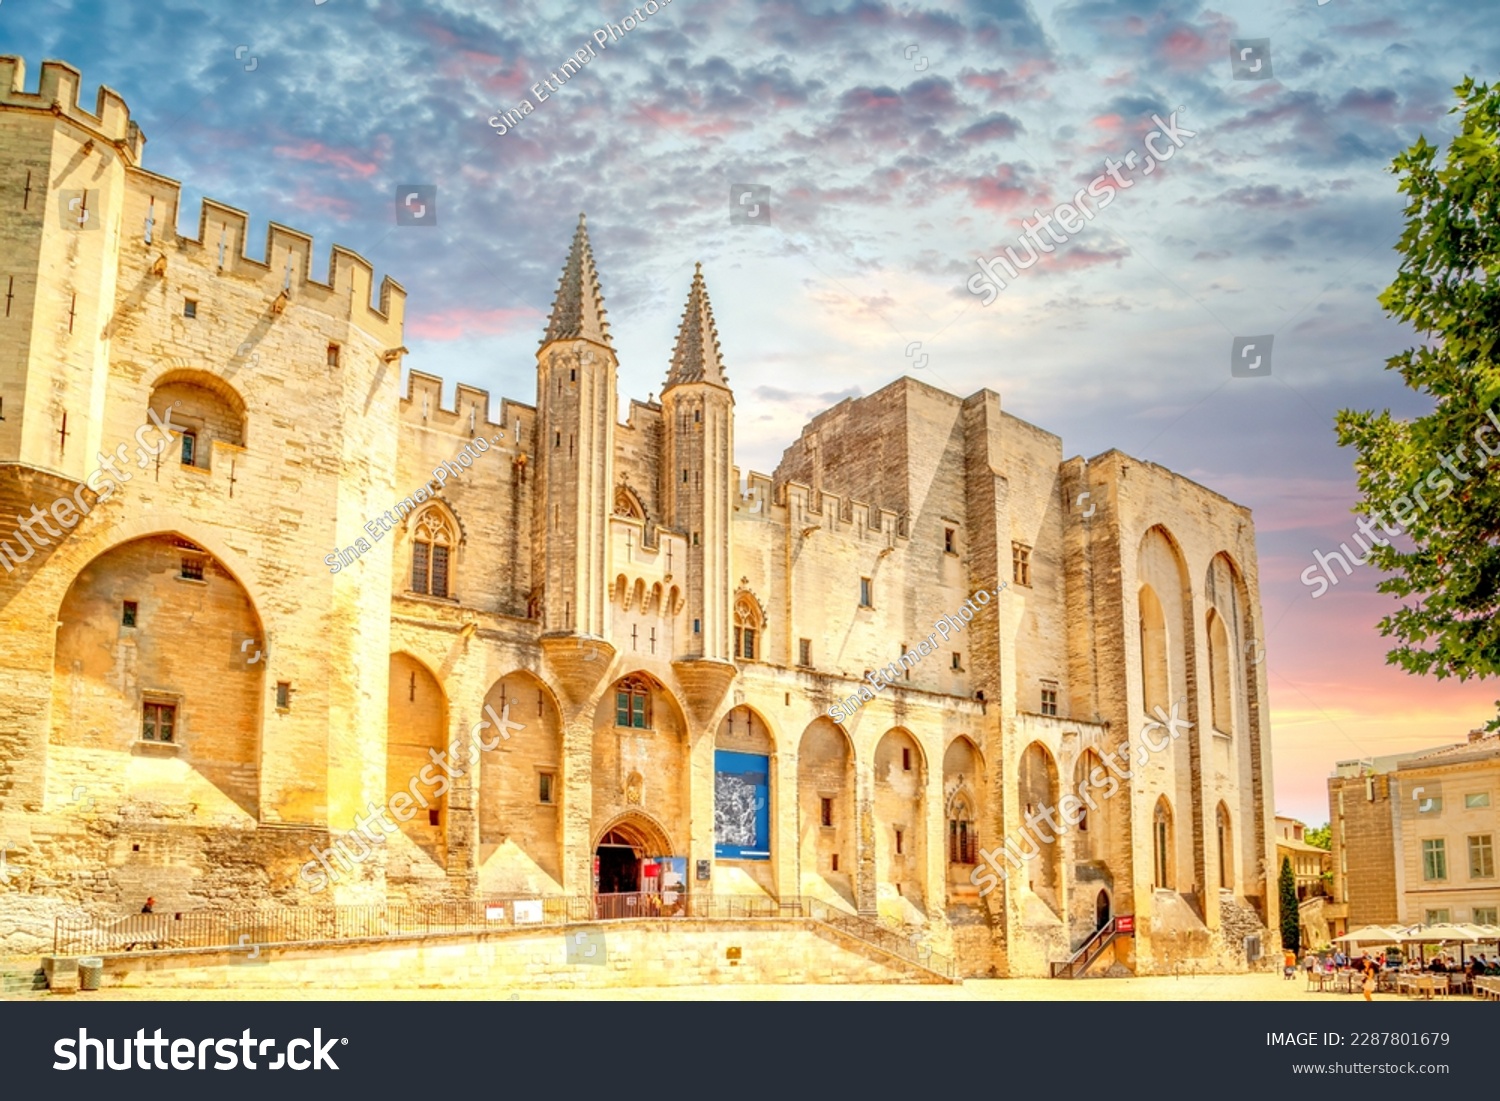 Cathedral of Avignon in France  #2287801679